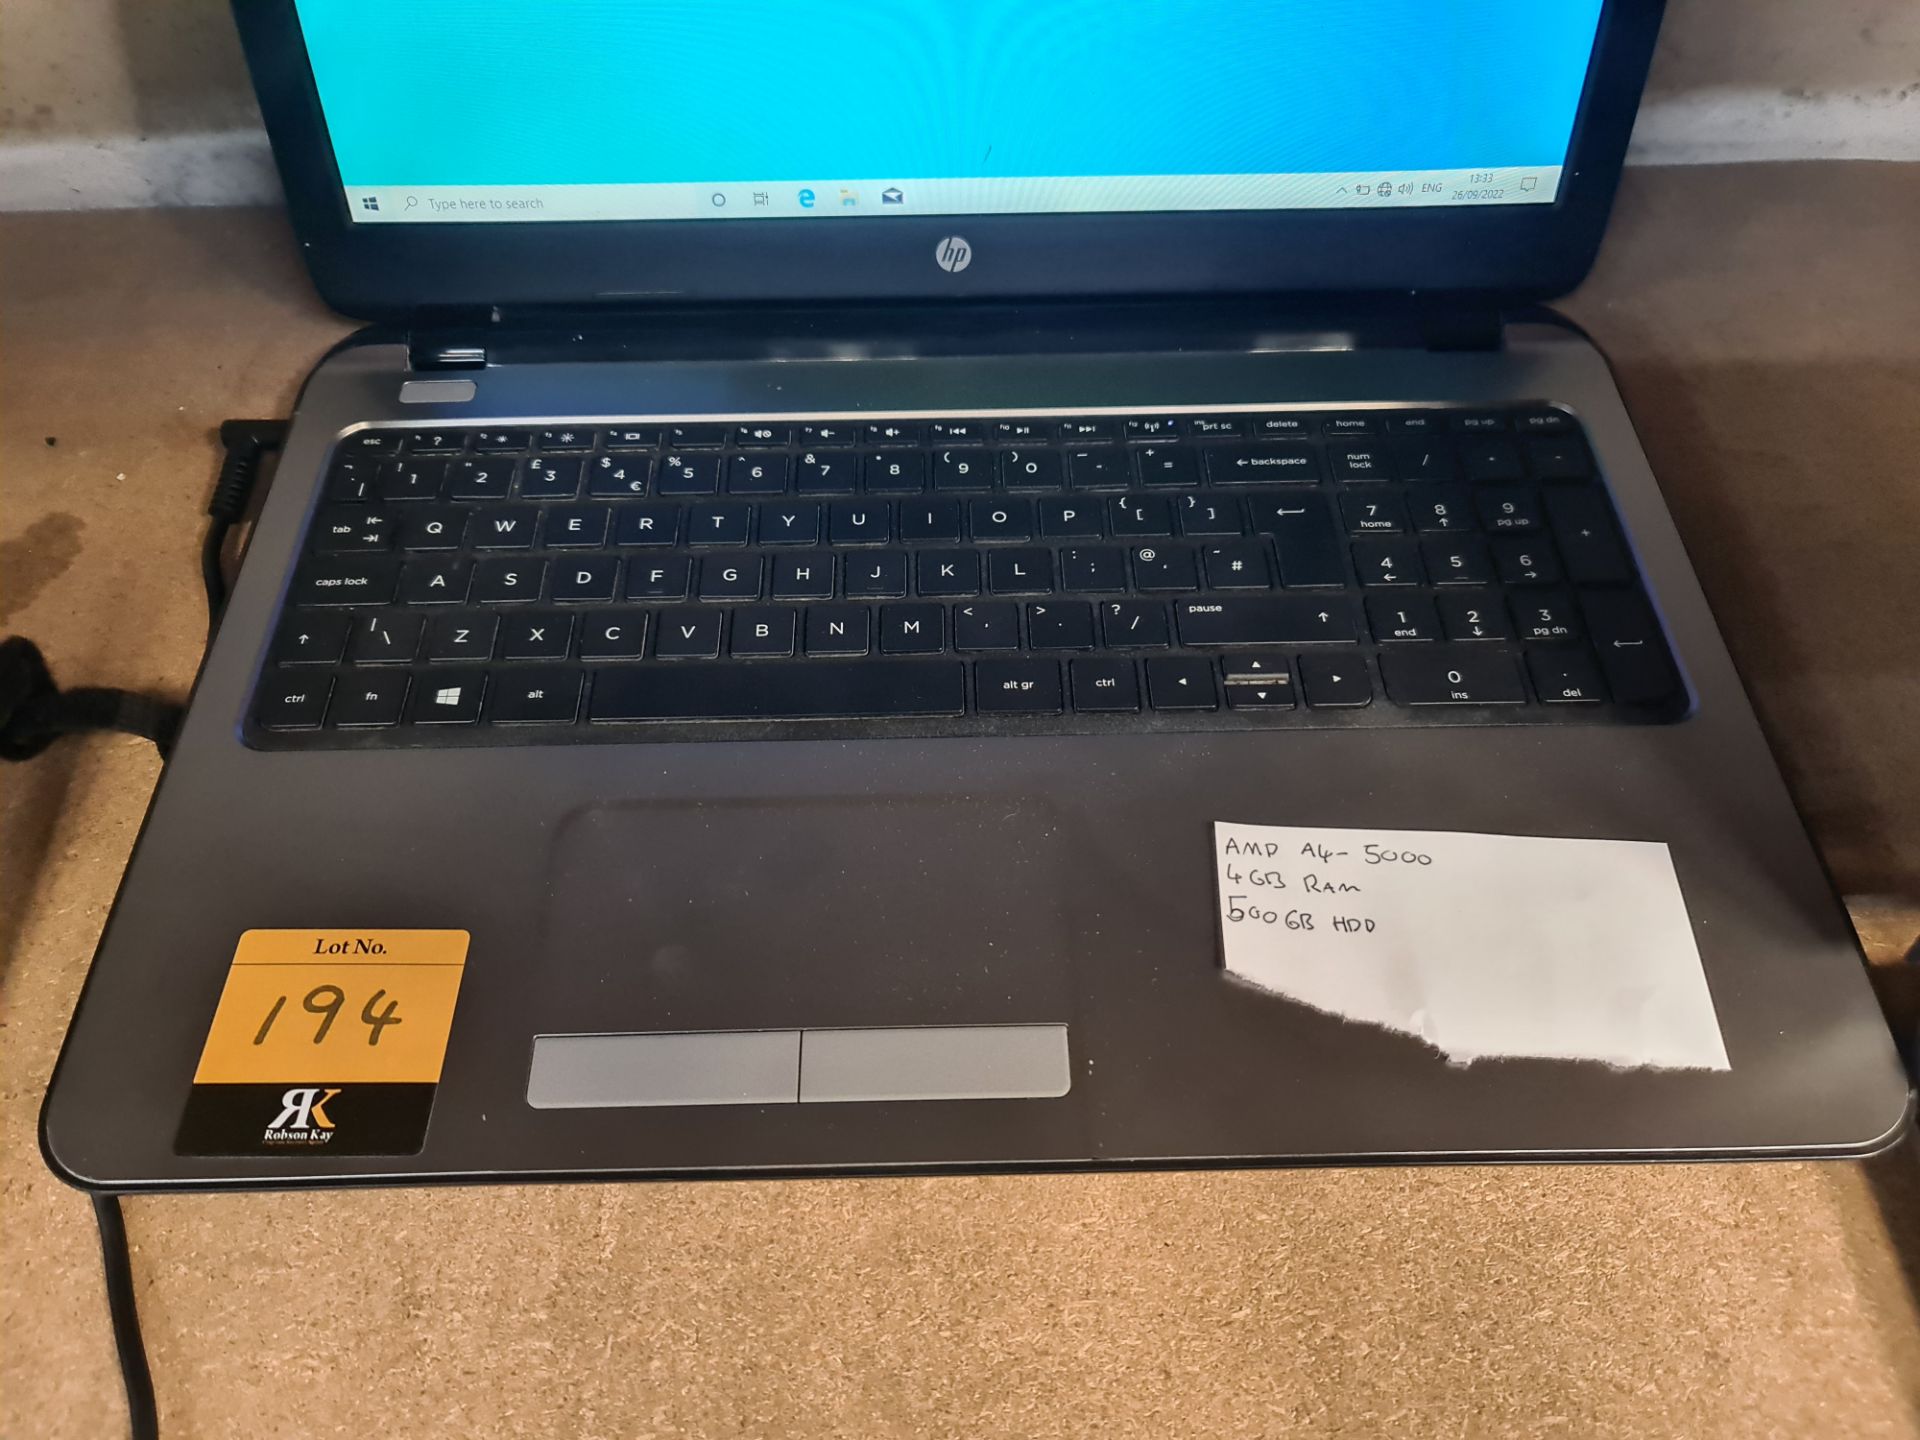 HP notebook computer with AMD A4-5000 processor, 4GB RAM, 500GB hard drive, etc. includes powerpack/ - Image 2 of 5